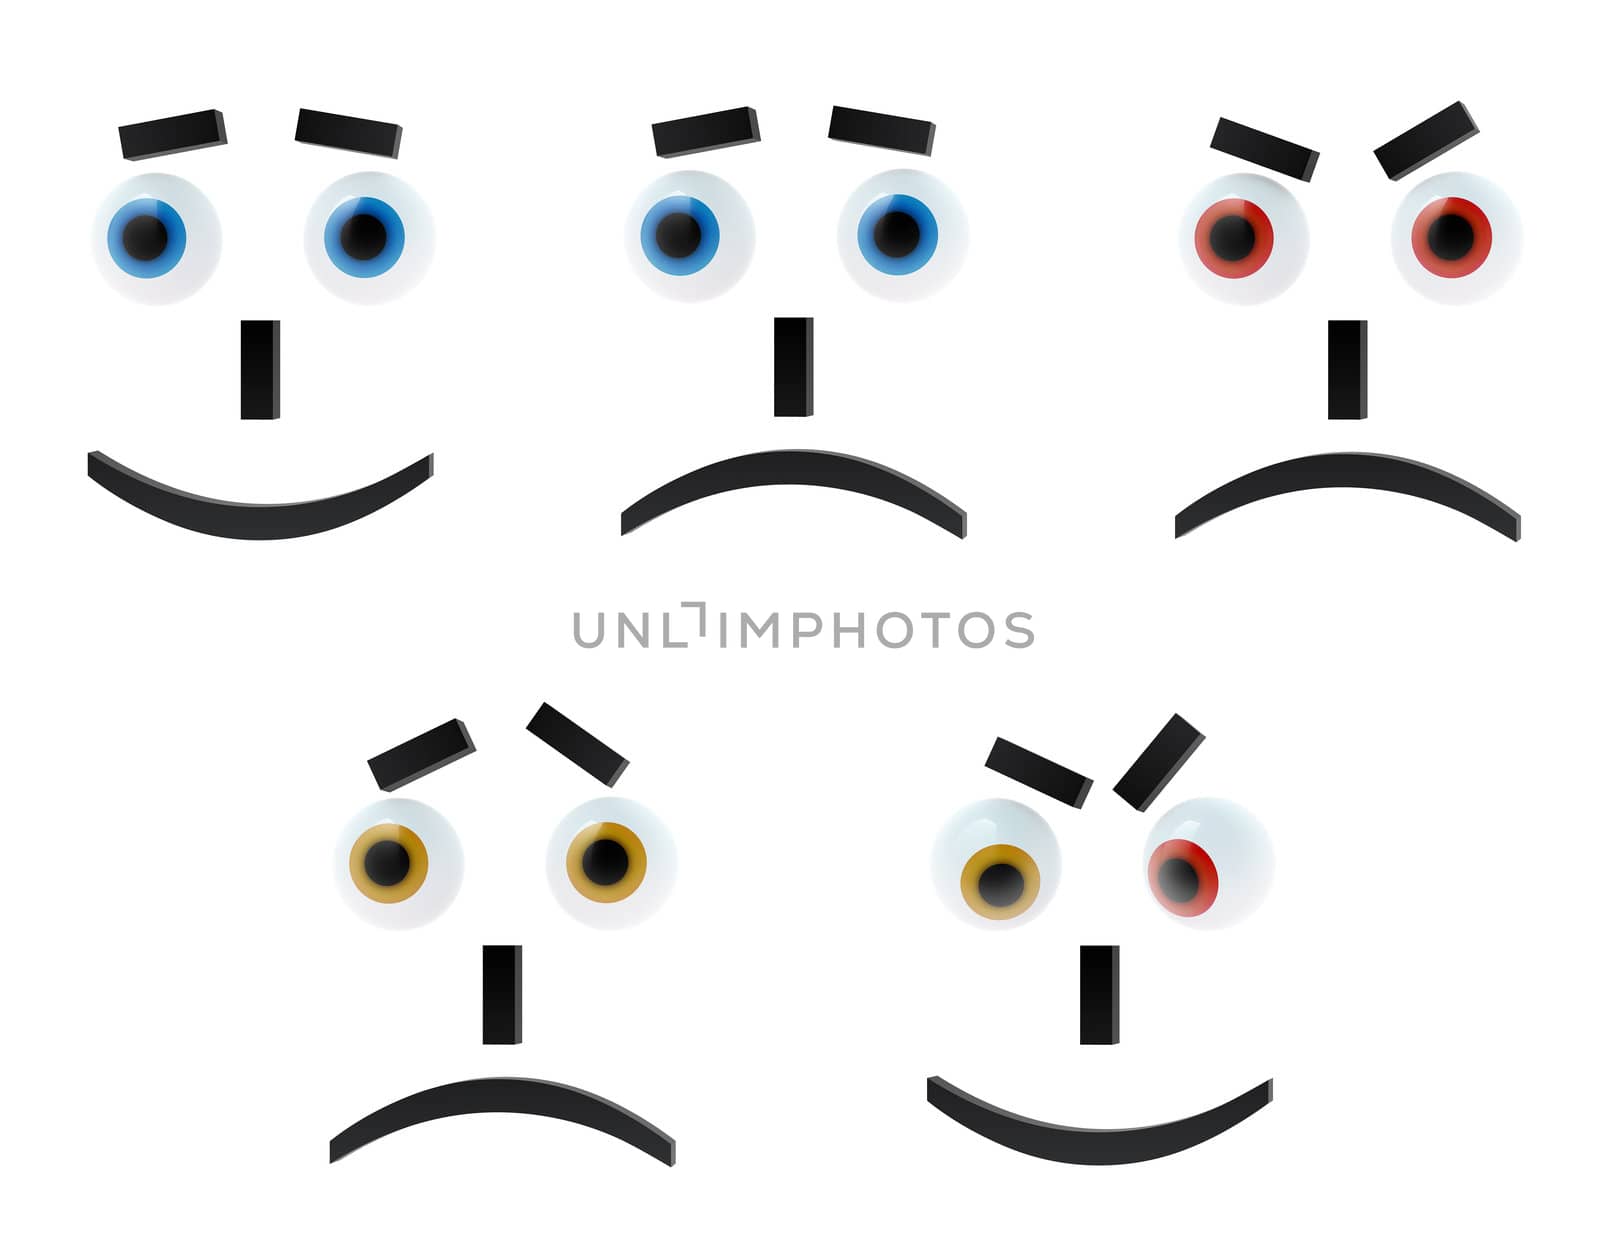 Set of five 3D-emoticons on white background: cheerful, sad, surprised, aggressive and crazy